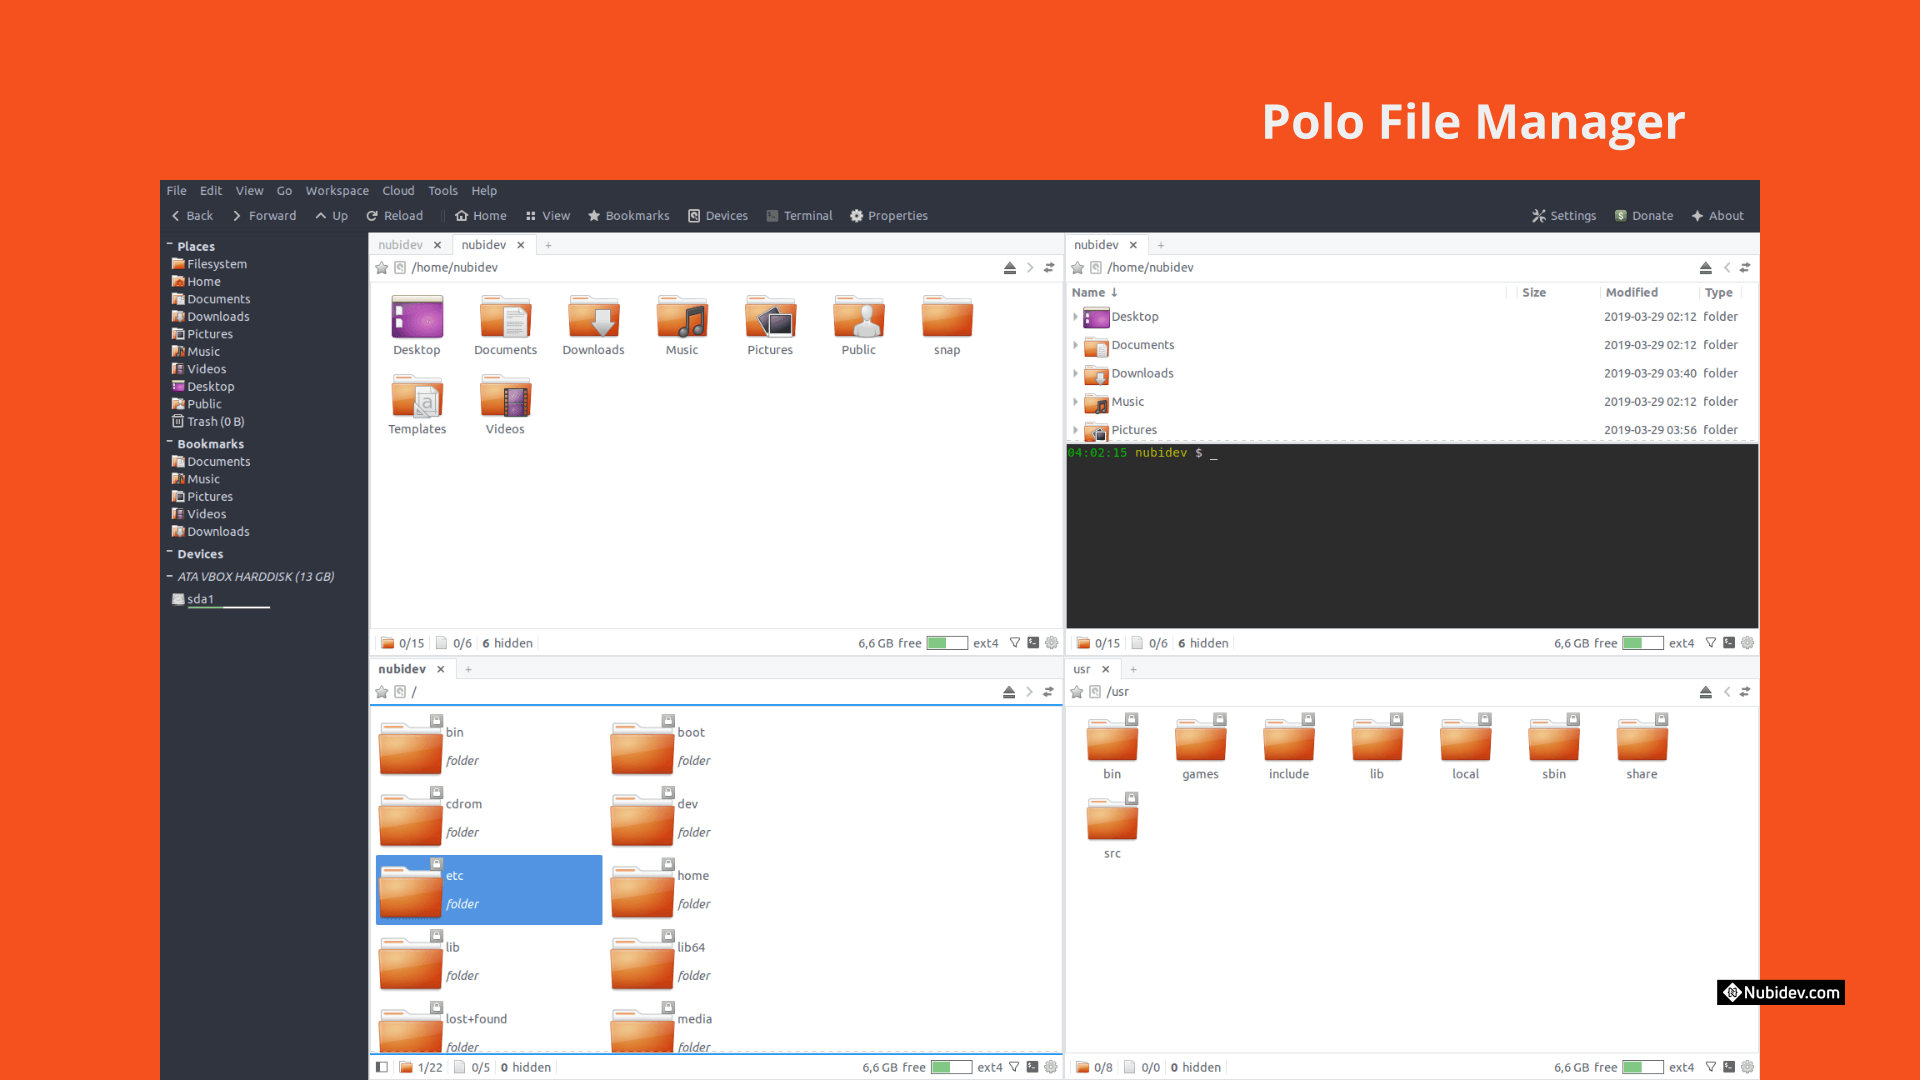 Polo File Manager